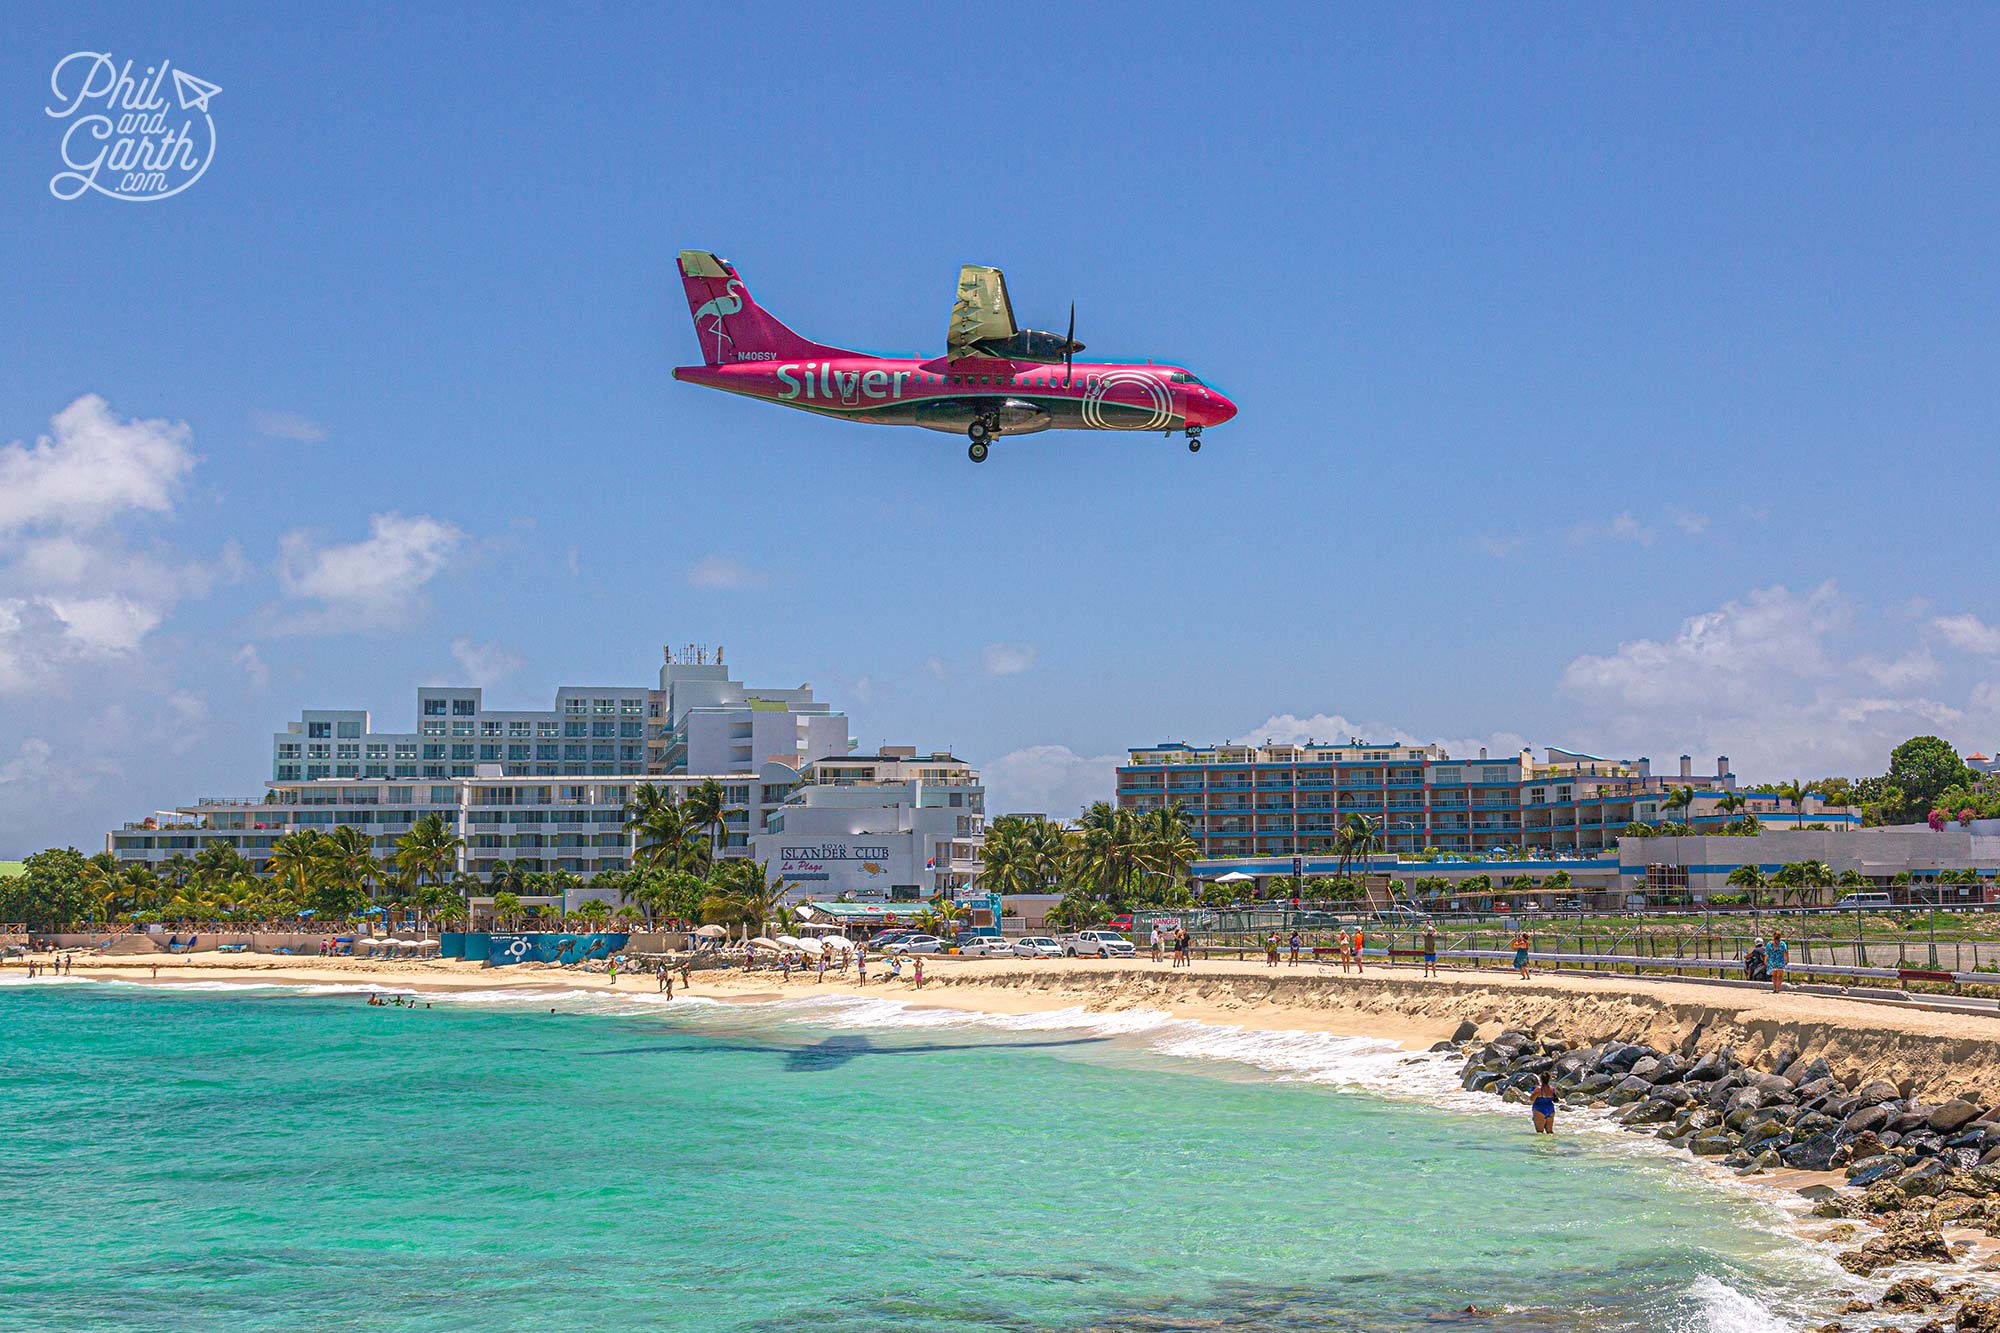 The view of planes landing from The Sunset Beach Bar